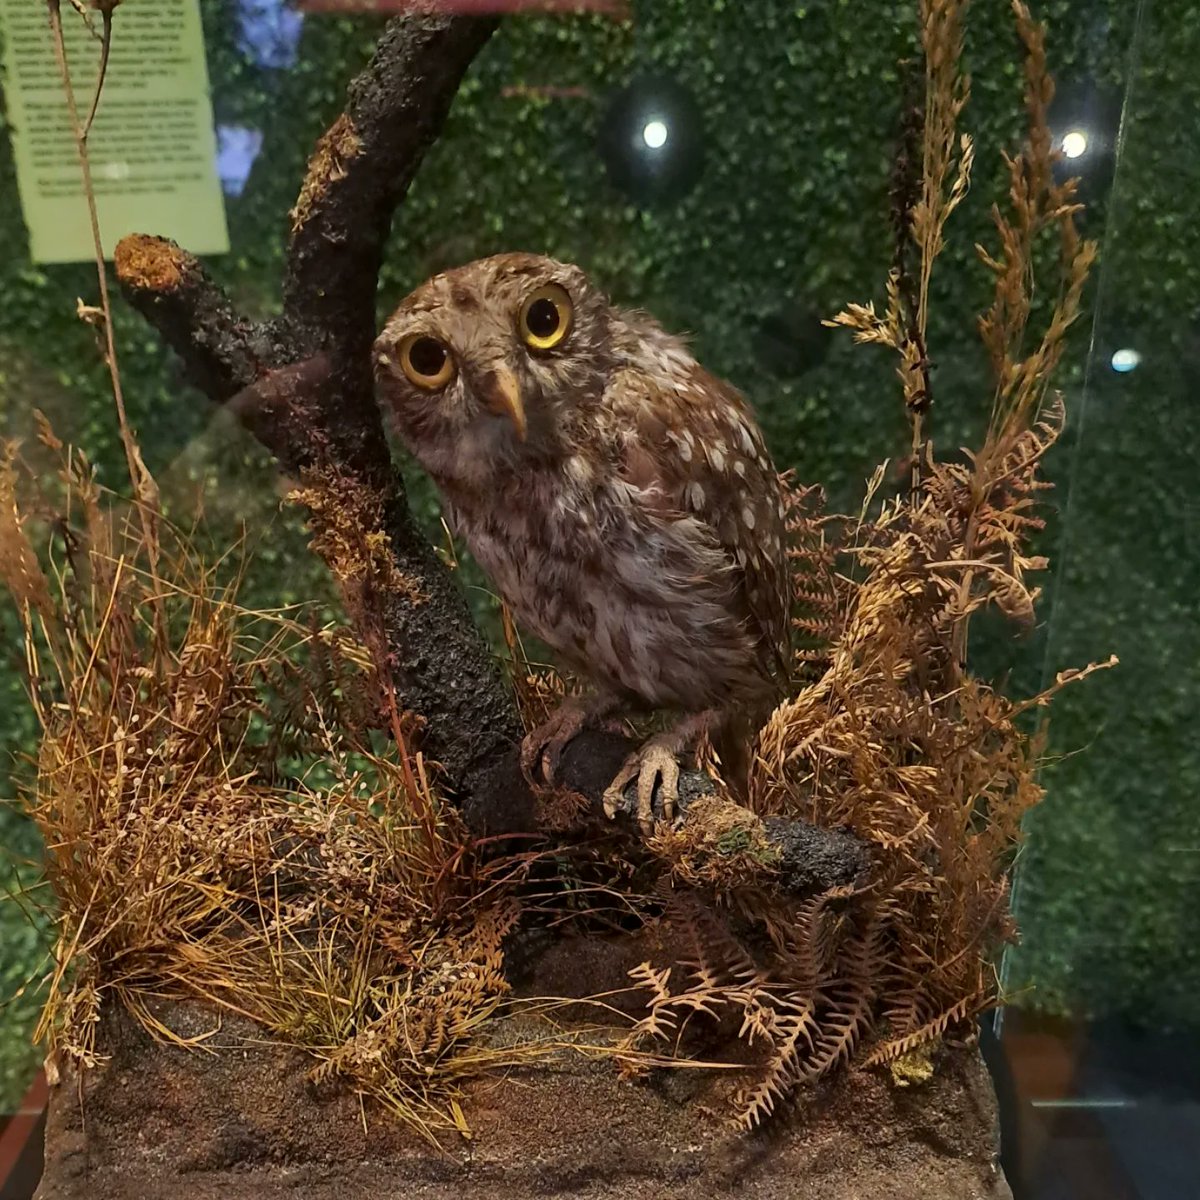 Athena, Florence Nightingale's owl. 'Poor little beastie, it was odd how much I loved you'. @florencemuseum I love a museum full of relics!